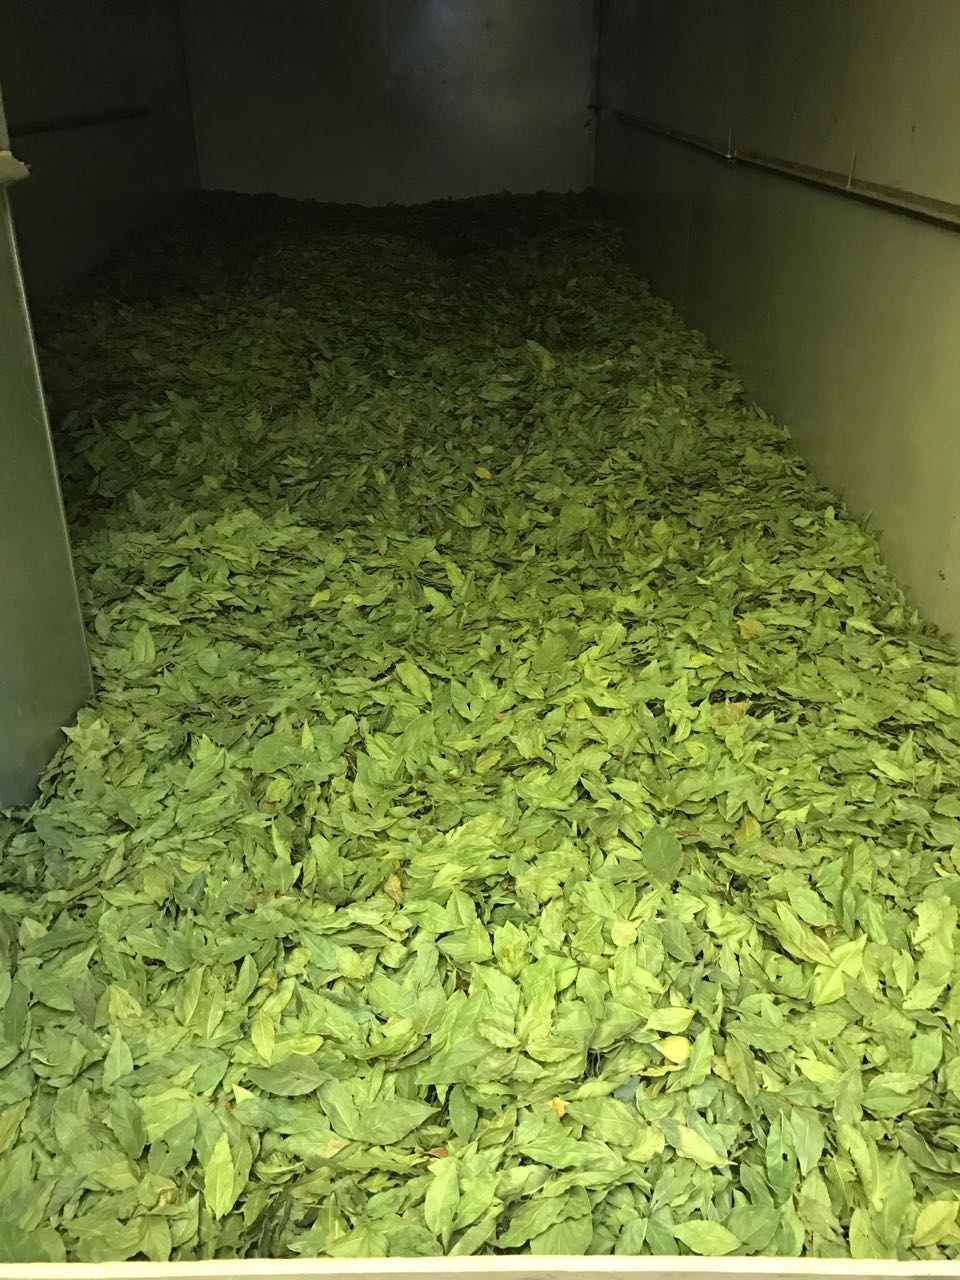 BAY LEAVES PROCESSING